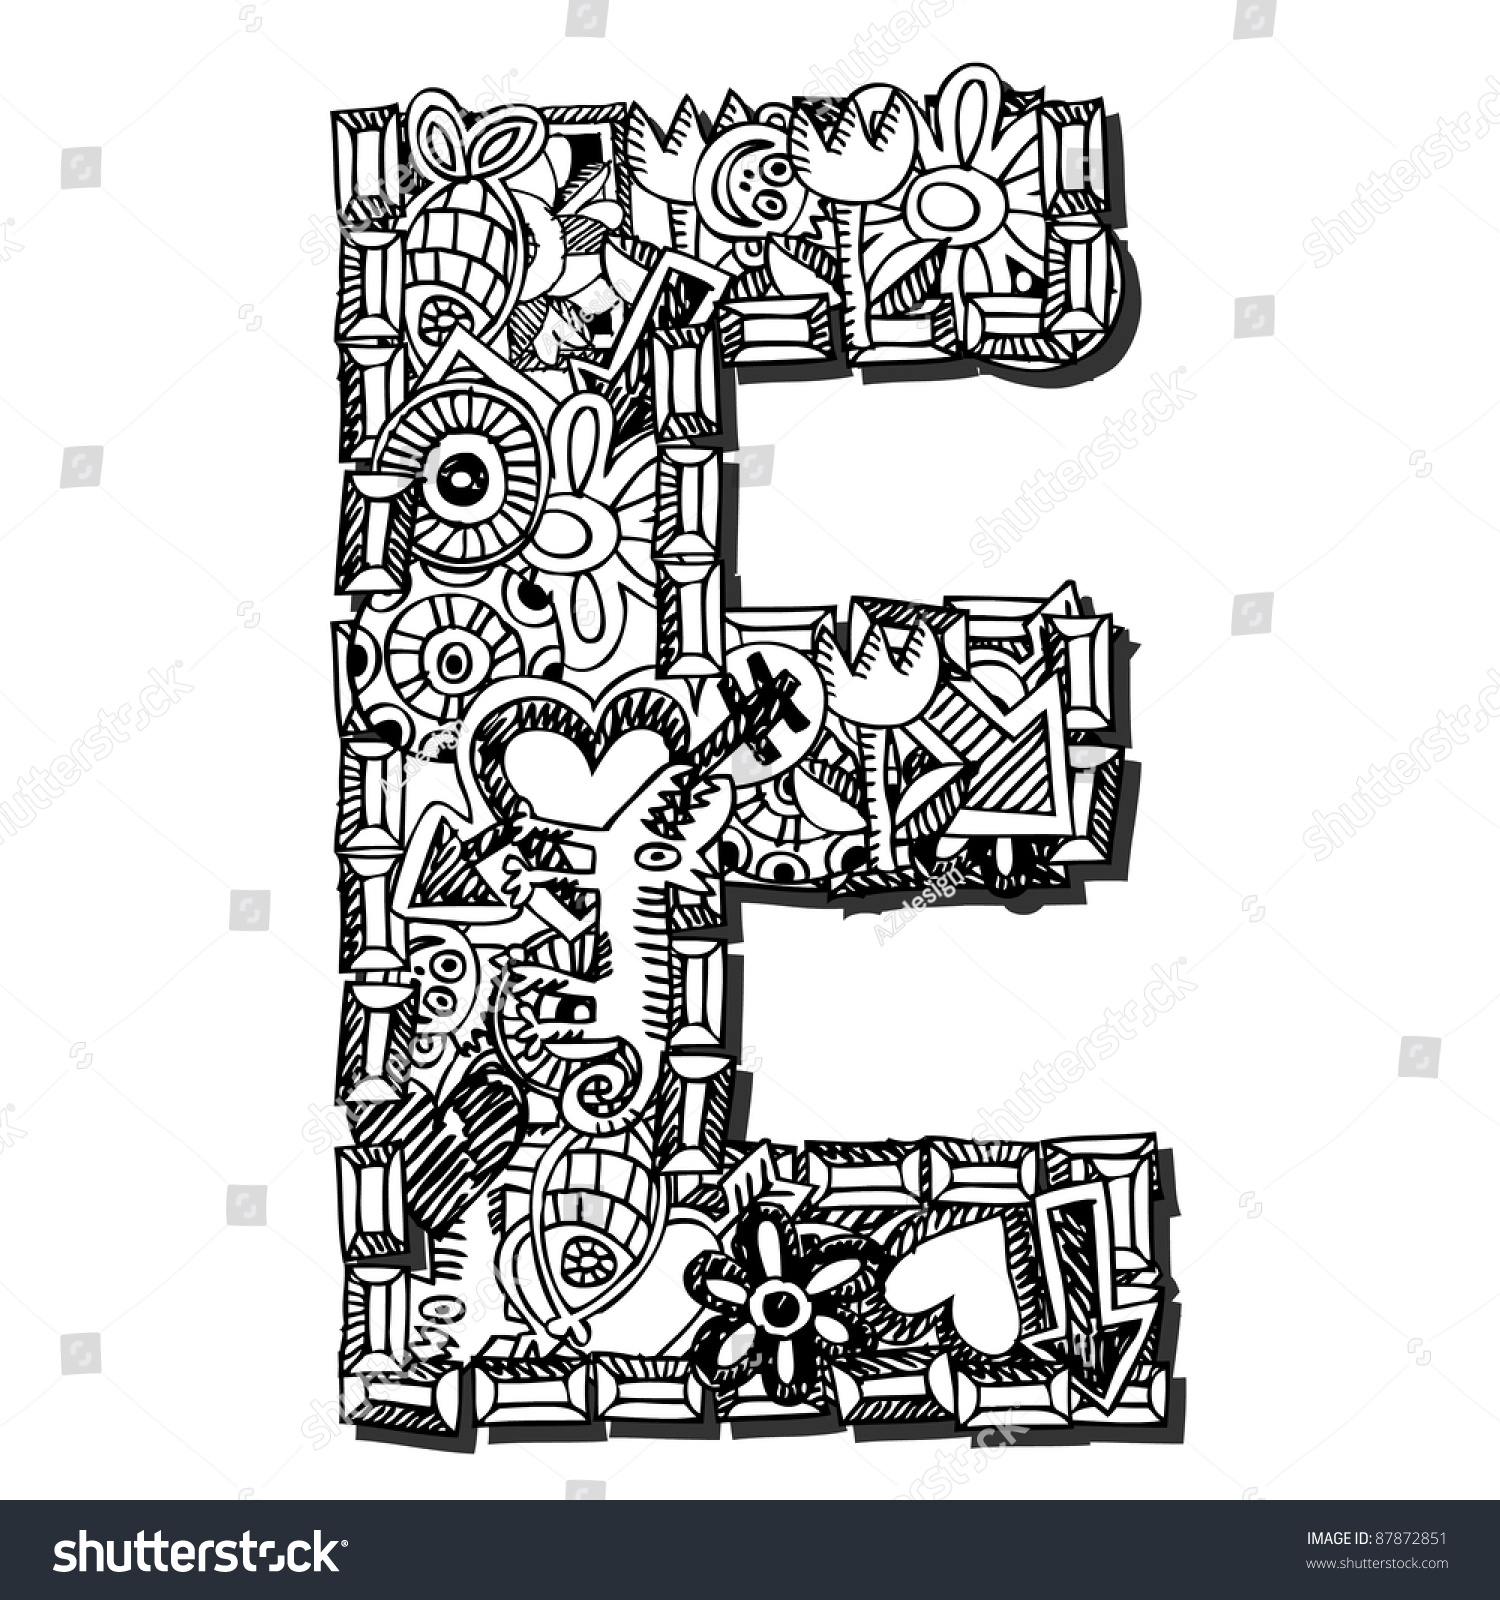 Royalty Free Childlike Doodle ABC Crazy Letter E 87872851 Stock